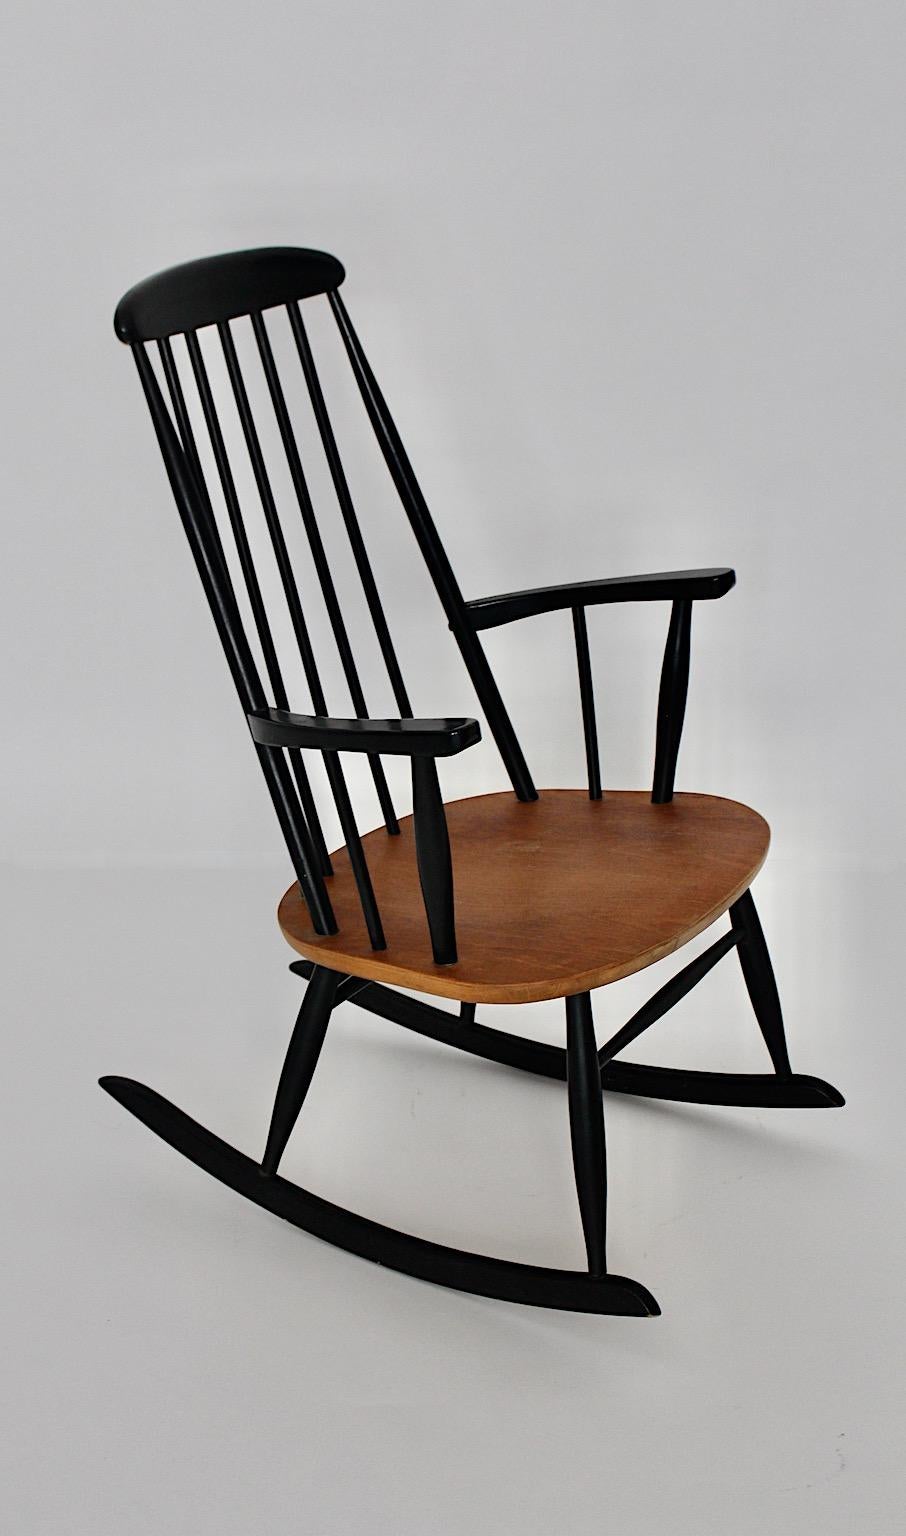 Mid-Century Modern vintage rocking chair from beech and teak in black and brown color tone by Ilmari Tapiovaara for Asko Finland, 1950s.
A wonderful rocking chair from beech and teak by the Finnish designer
Ilmari Tapiovaara for Asko 1950s. Please